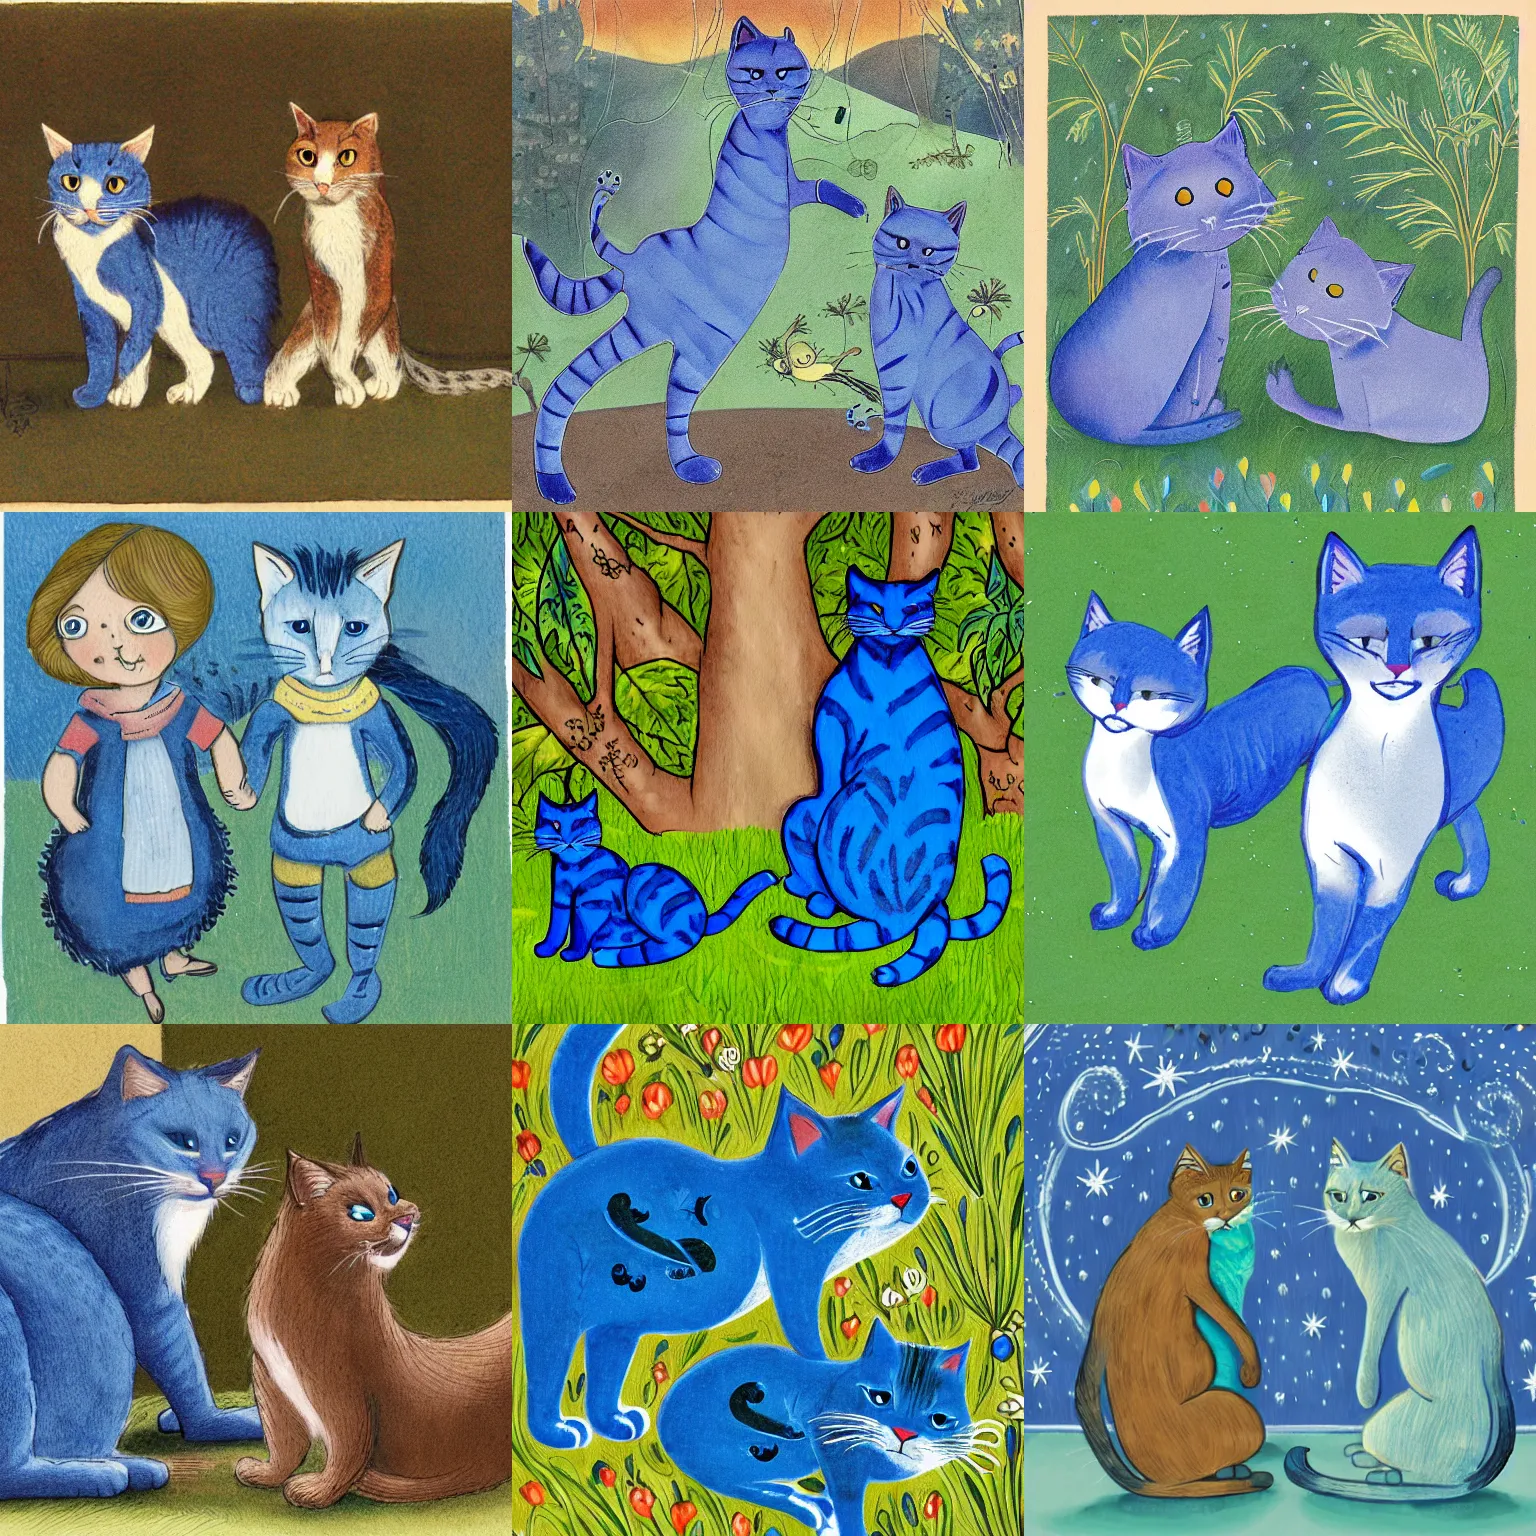 Prompt: a storybook illustration of a pair of blue cats